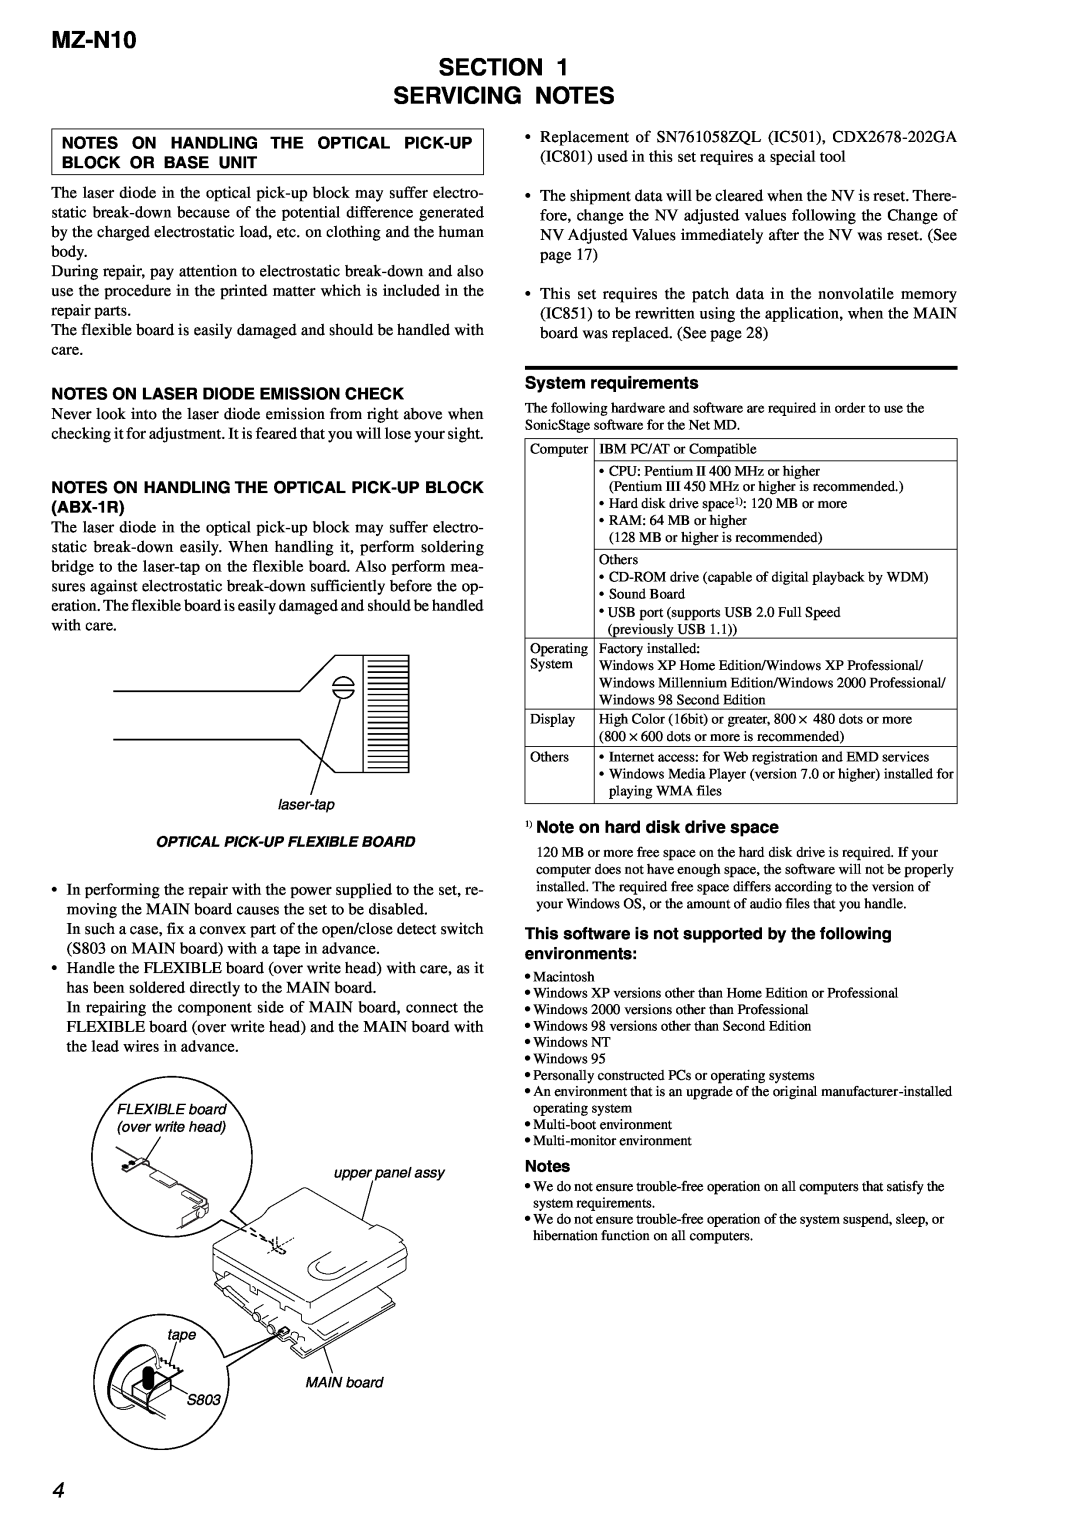 Sony service manual MZ-N10 SECTION SERVICING NOTES, Notes On Laser Diode Emission Check, System requirements 